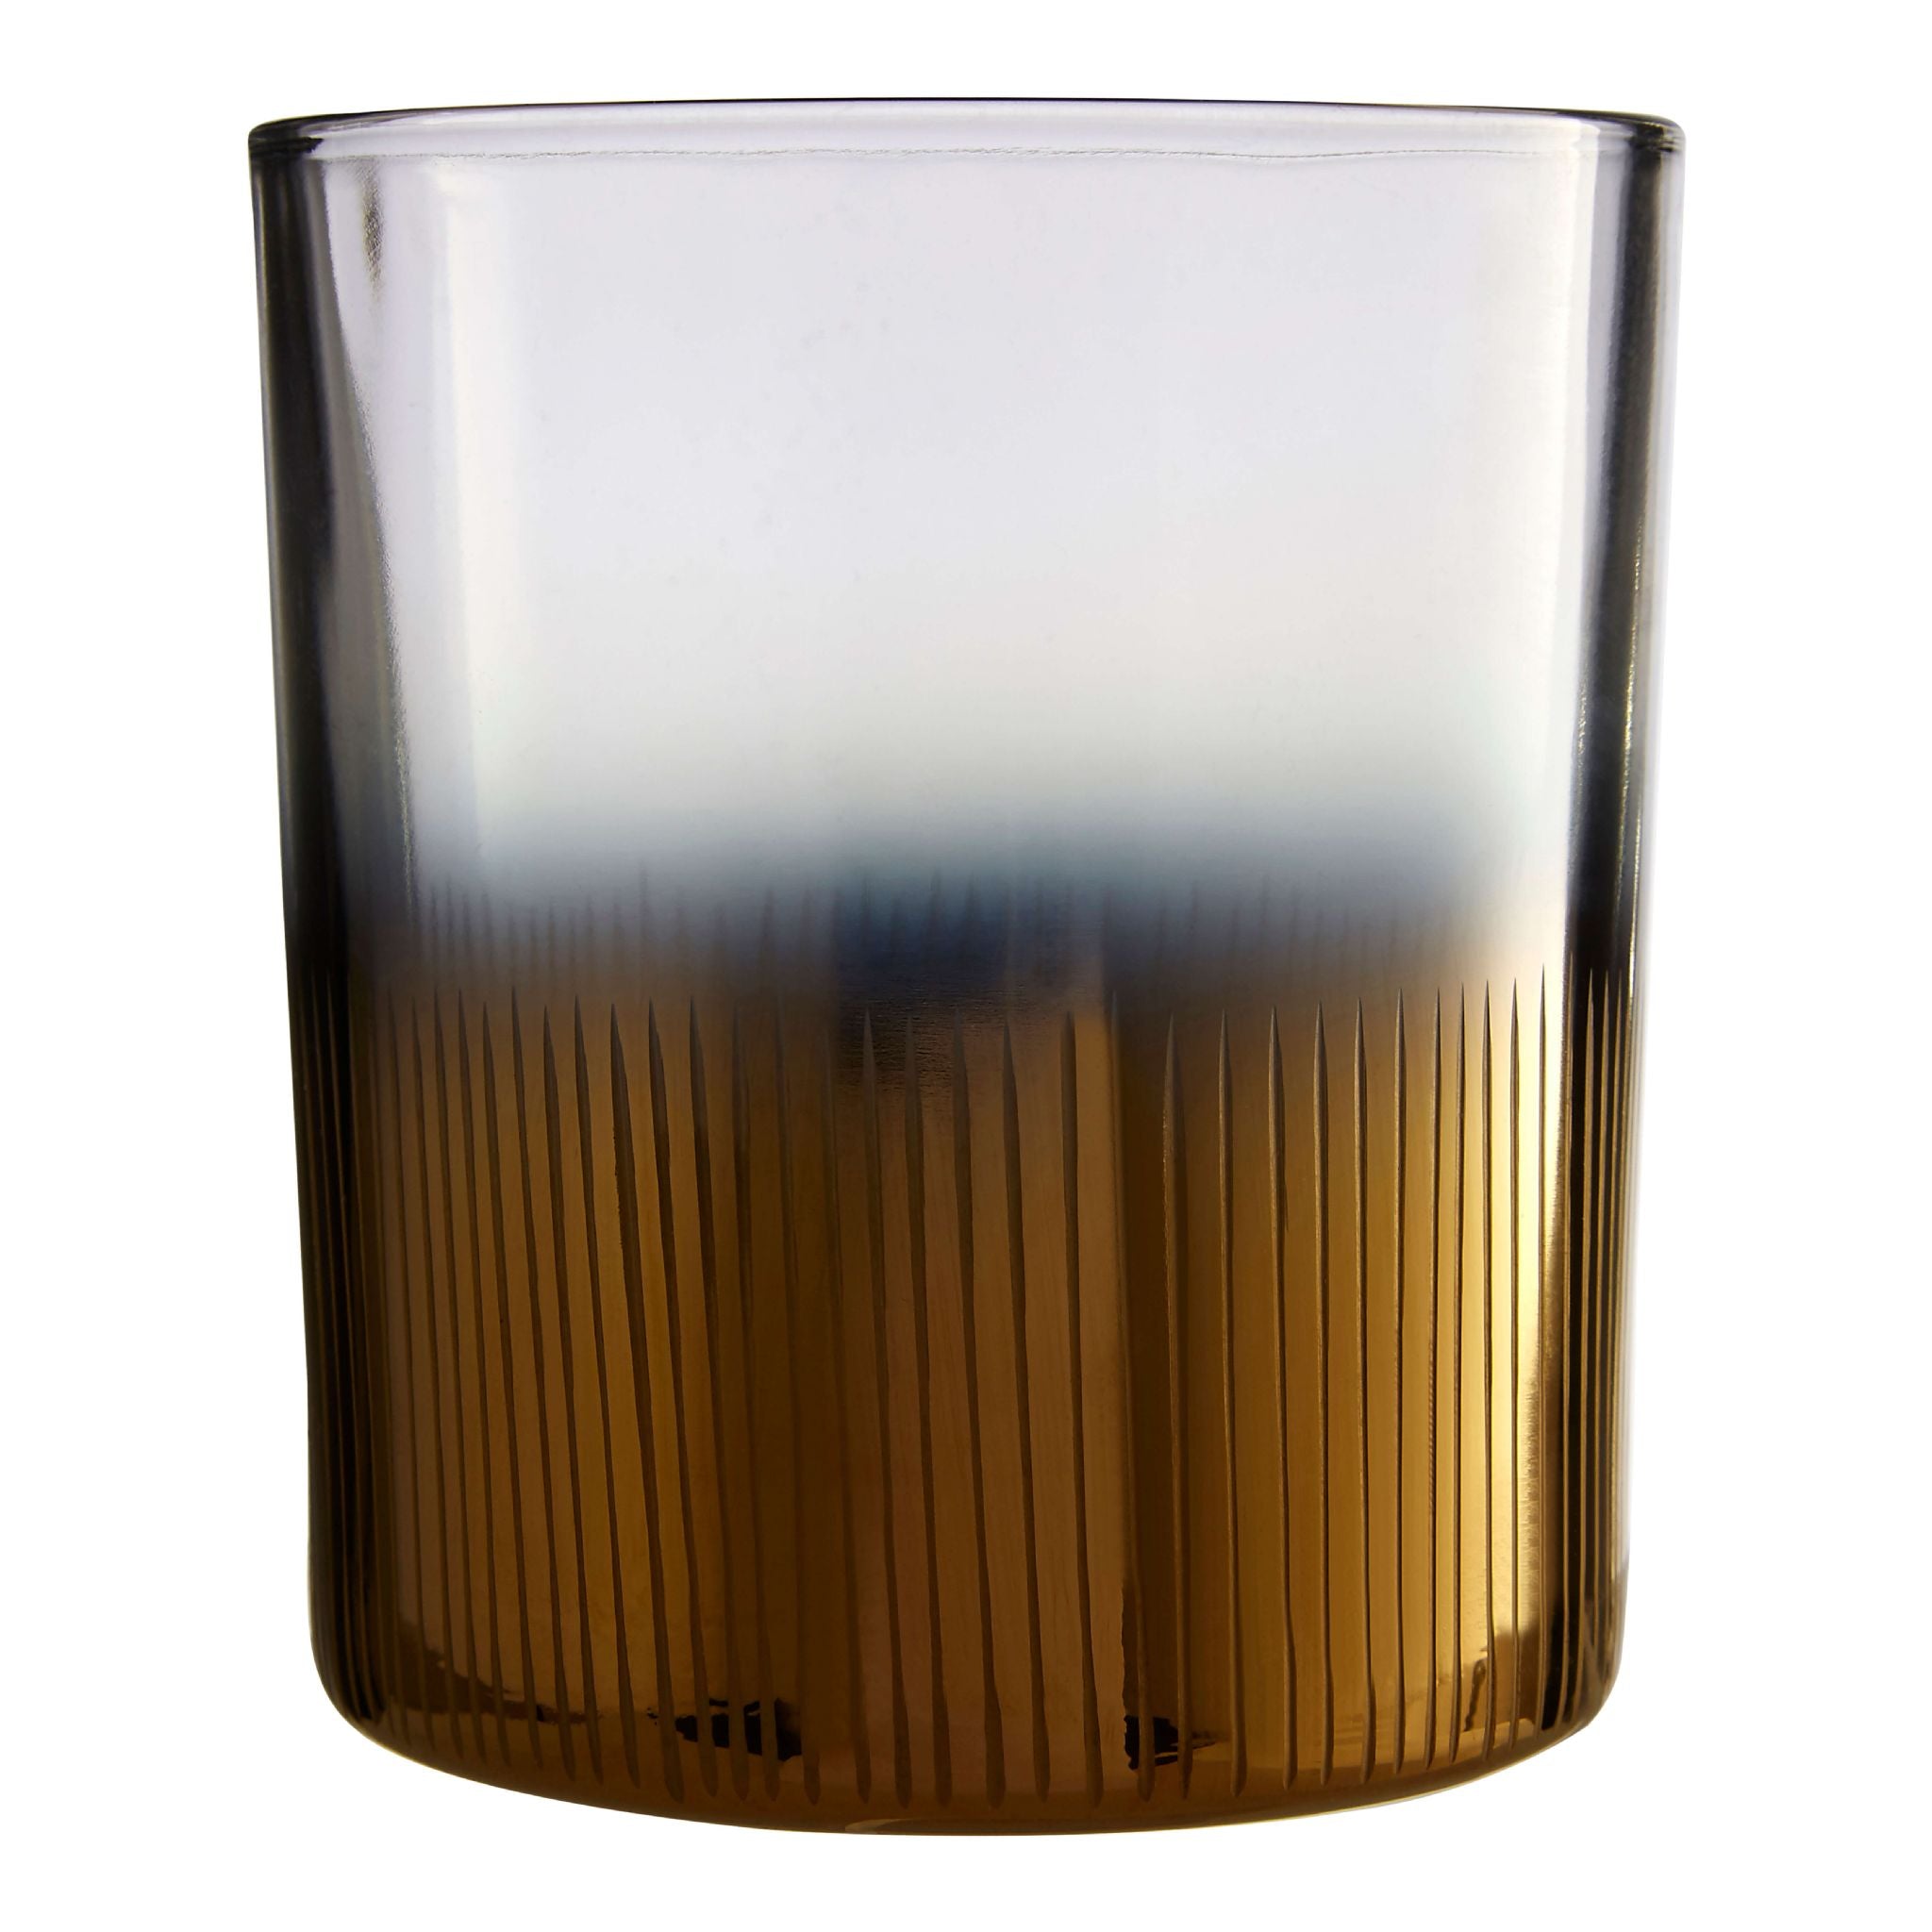 Smoked Gold Tea Light Holder - Outlet - Save 20%